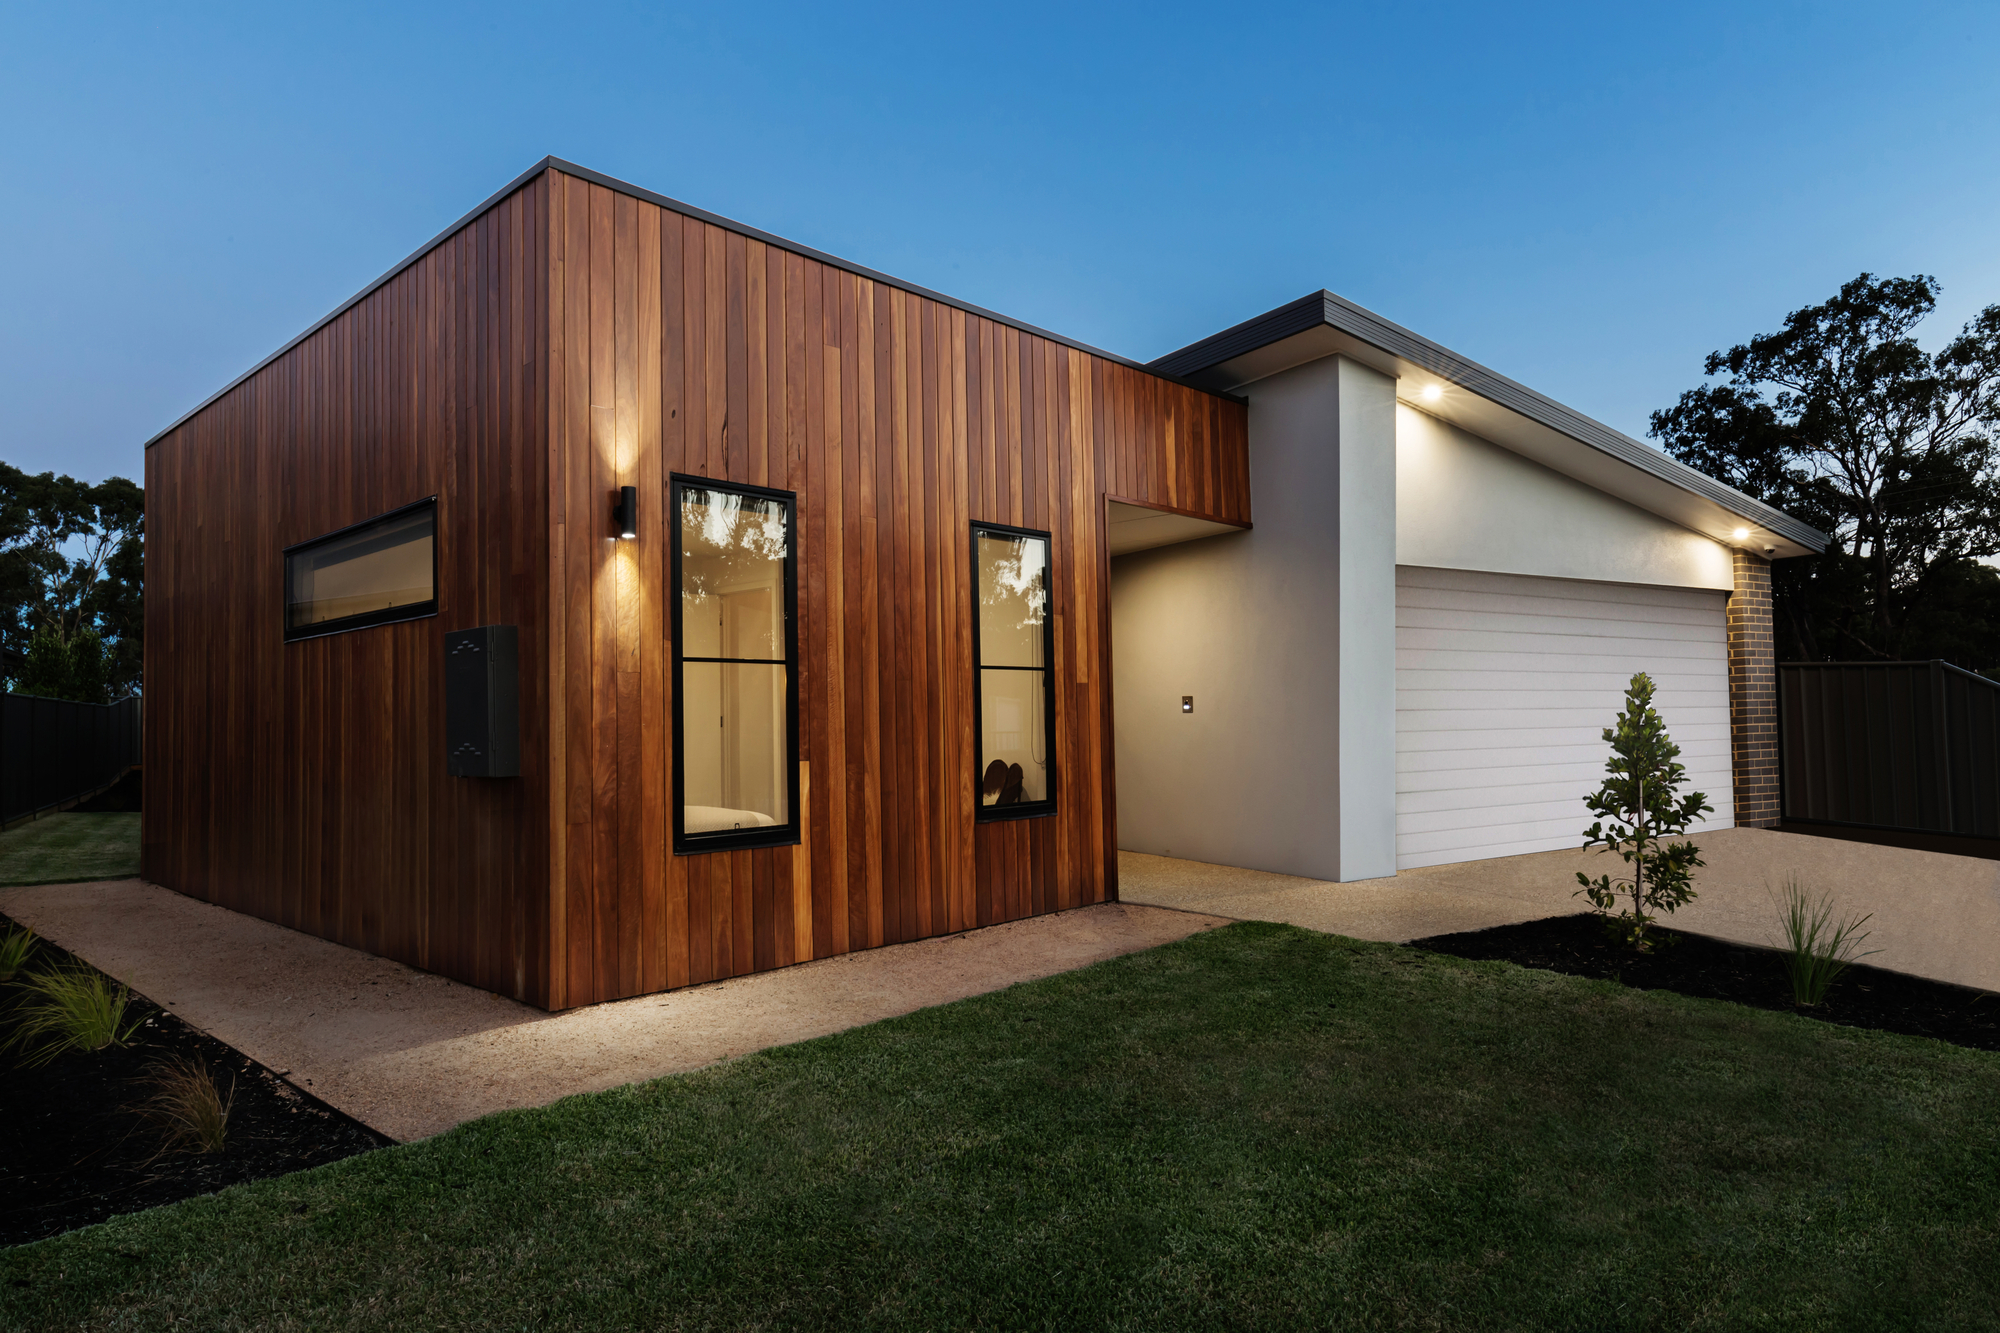 Modern house with wooden facade and attached garage at dusk